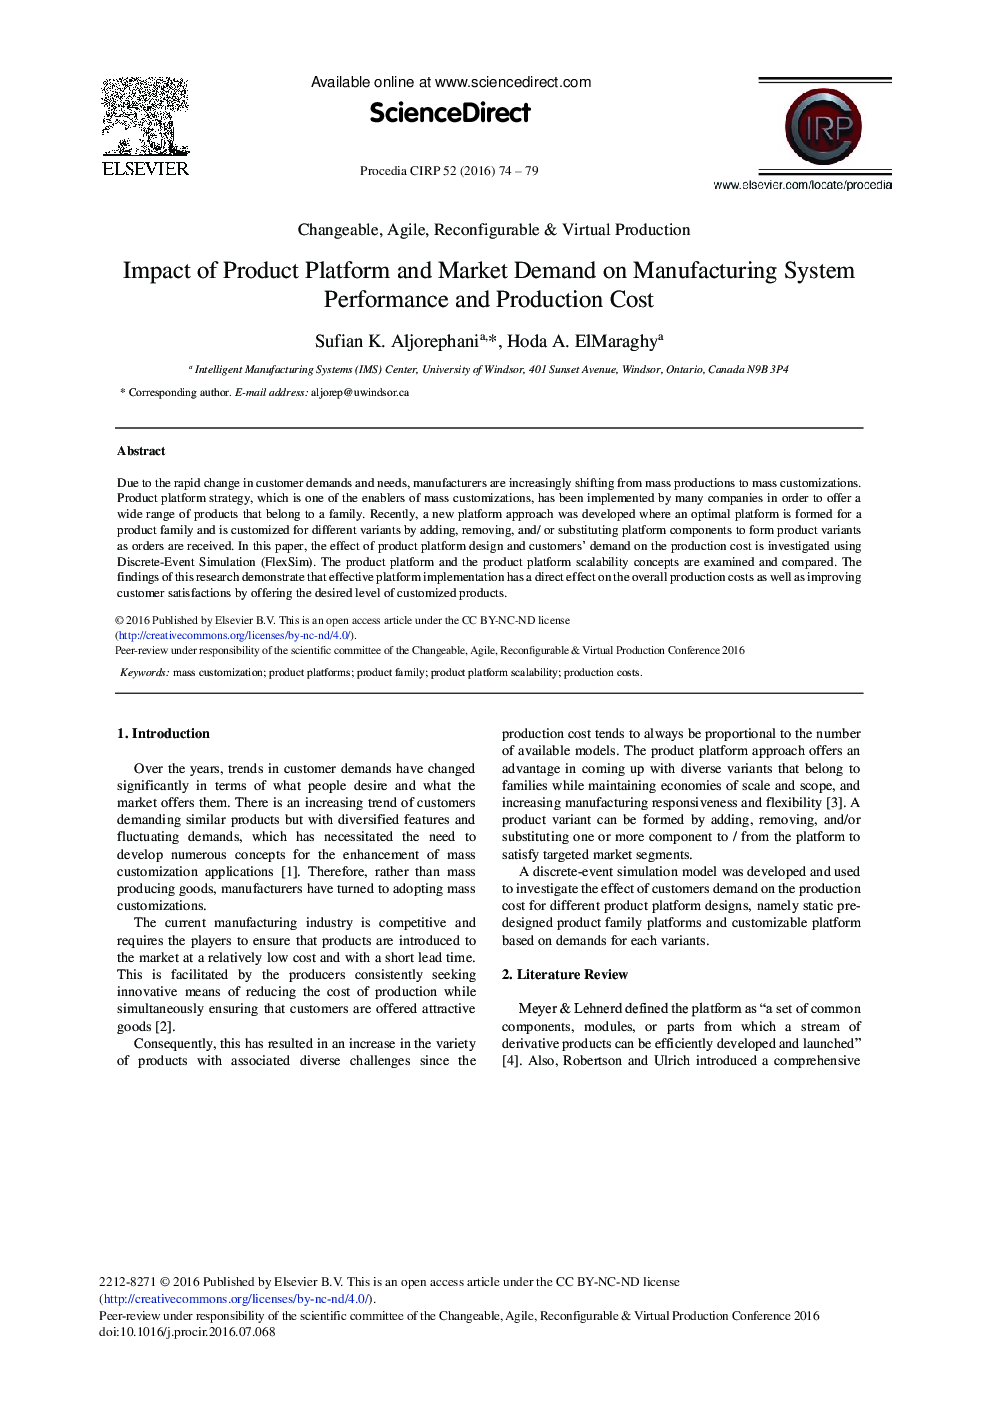 Impact of Product Platform and Market Demand on Manufacturing System Performance and Production Cost 